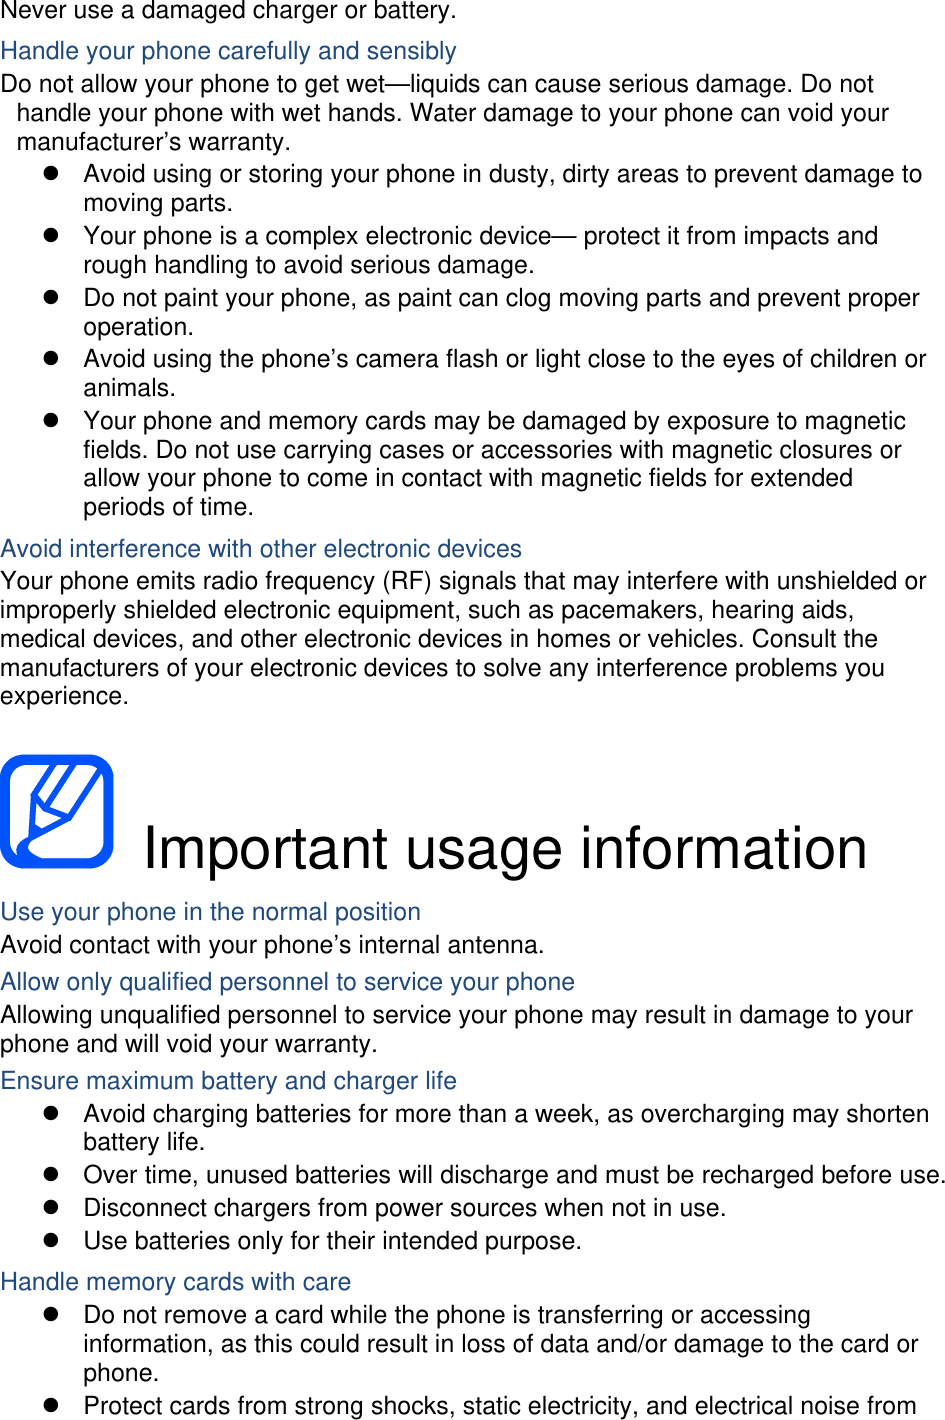 Never use a damaged charger or battery. Handle your phone carefully and sensibly Do not allow your phone to get wet—liquids can cause serious damage. Do not handle your phone with wet hands. Water damage to your phone can void your manufacturer’s warranty.   Avoid using or storing your phone in dusty, dirty areas to prevent damage to moving parts.   Your phone is a complex electronic device— protect it from impacts and rough handling to avoid serious damage.   Do not paint your phone, as paint can clog moving parts and prevent proper operation.   Avoid using the phone’s camera flash or light close to the eyes of children or animals.   Your phone and memory cards may be damaged by exposure to magnetic fields. Do not use carrying cases or accessories with magnetic closures or allow your phone to come in contact with magnetic fields for extended periods of time. Avoid interference with other electronic devices Your phone emits radio frequency (RF) signals that may interfere with unshielded or improperly shielded electronic equipment, such as pacemakers, hearing aids, medical devices, and other electronic devices in homes or vehicles. Consult the manufacturers of your electronic devices to solve any interference problems you experience.   Important usage information Use your phone in the normal position Avoid contact with your phone’s internal antenna. Allow only qualified personnel to service your phone Allowing unqualified personnel to service your phone may result in damage to your phone and will void your warranty. Ensure maximum battery and charger life   Avoid charging batteries for more than a week, as overcharging may shorten battery life.   Over time, unused batteries will discharge and must be recharged before use.   Disconnect chargers from power sources when not in use.   Use batteries only for their intended purpose. Handle memory cards with care   Do not remove a card while the phone is transferring or accessing information, as this could result in loss of data and/or damage to the card or phone.   Protect cards from strong shocks, static electricity, and electrical noise from 